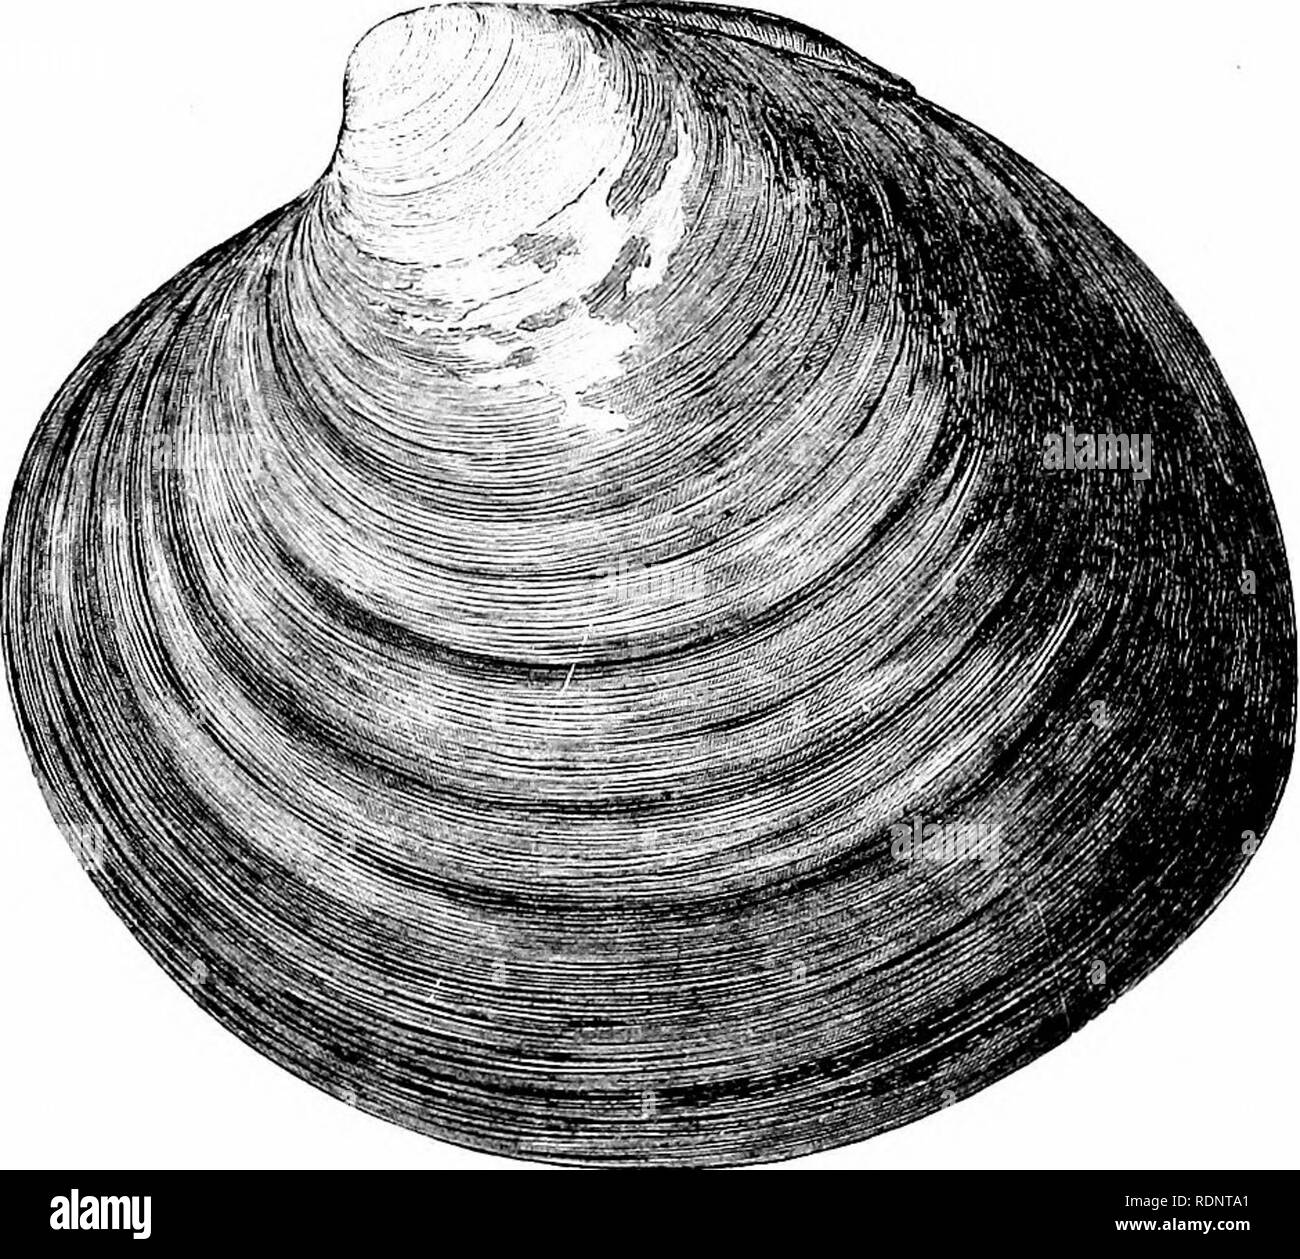 . The fisheries and fishery industries of the United States. Prepared through the co-operation of the commissioner of fisheries and the superintendent of the tenth census. Fisheries. Fig. 6.. Fig. 2. MUSSELS AND SEA CLAMS. Fig, 1. The Beach Clam or Hen Clam, SpisuUi soUdissima, p. 708. Natural size. Fig. '2. The Sea Clam, Cyprina islandica. Natural size. Fig. 3. The Mus.sel, Alijtilus edulis, 13. 709. Fig. 4. The Black Horse Mussel, Modiola nigra. Fig. 5. The Rough Mussel, Modiolaplicatula, p. 709. Fig. &lt;i. The Horse Mussel, Modiola modiolus, p. 709.. Please note that these images are extra Stock Photo